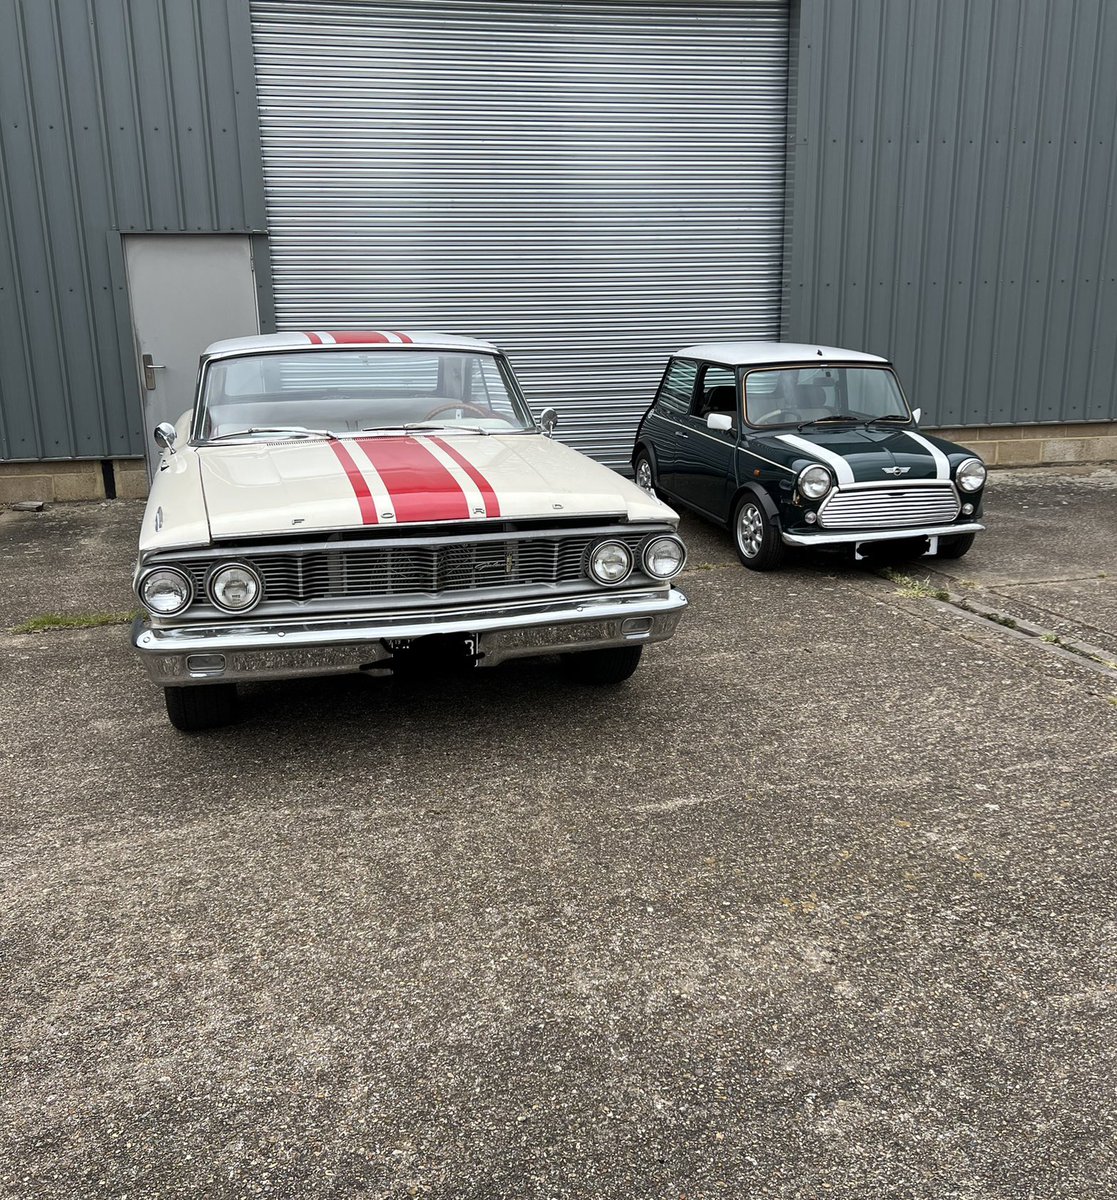 Little n Large side-by-side at the ‘inn #Ford #galaxie500 #mini #cooper #classiccars #classiccar #carstorage #classiccarstorage #mini1275 #Americana